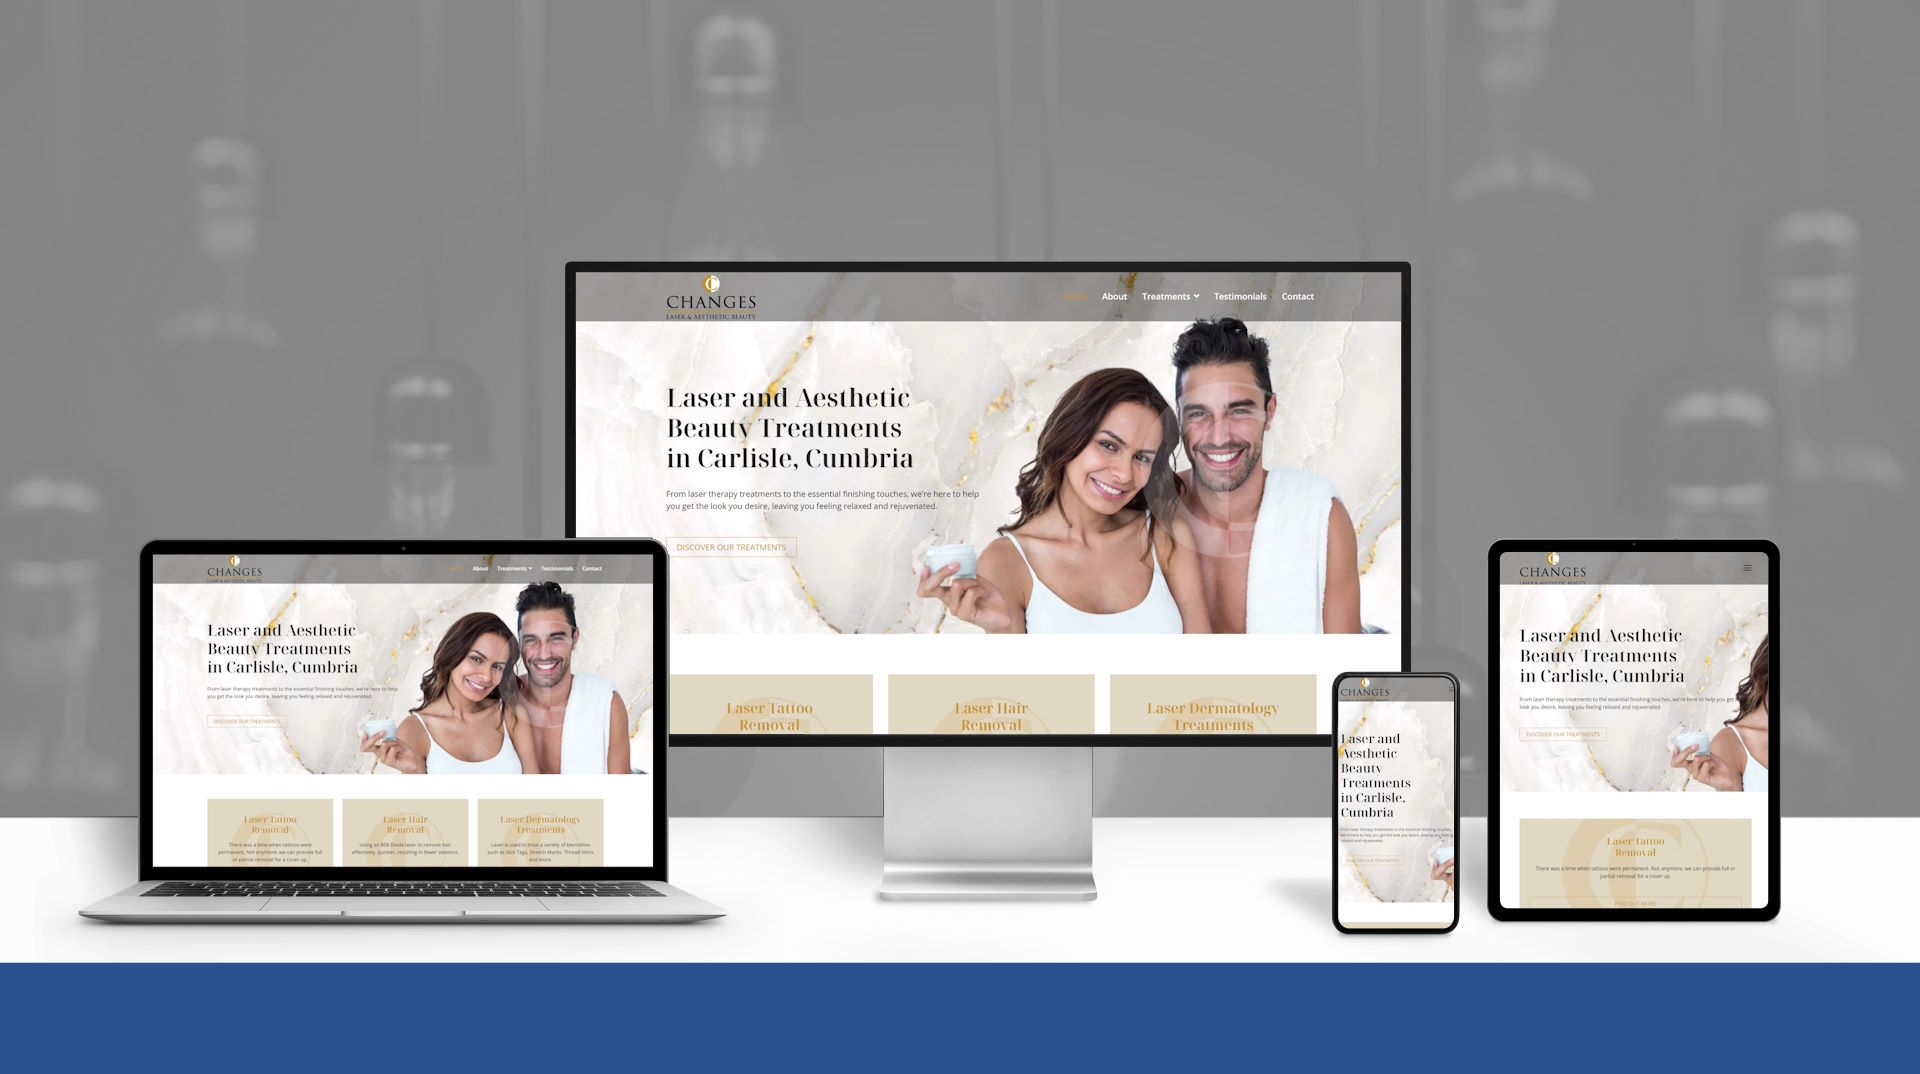 Bespoke website design for aesthetic clinics in Carlisle, Cumbria, and the UK